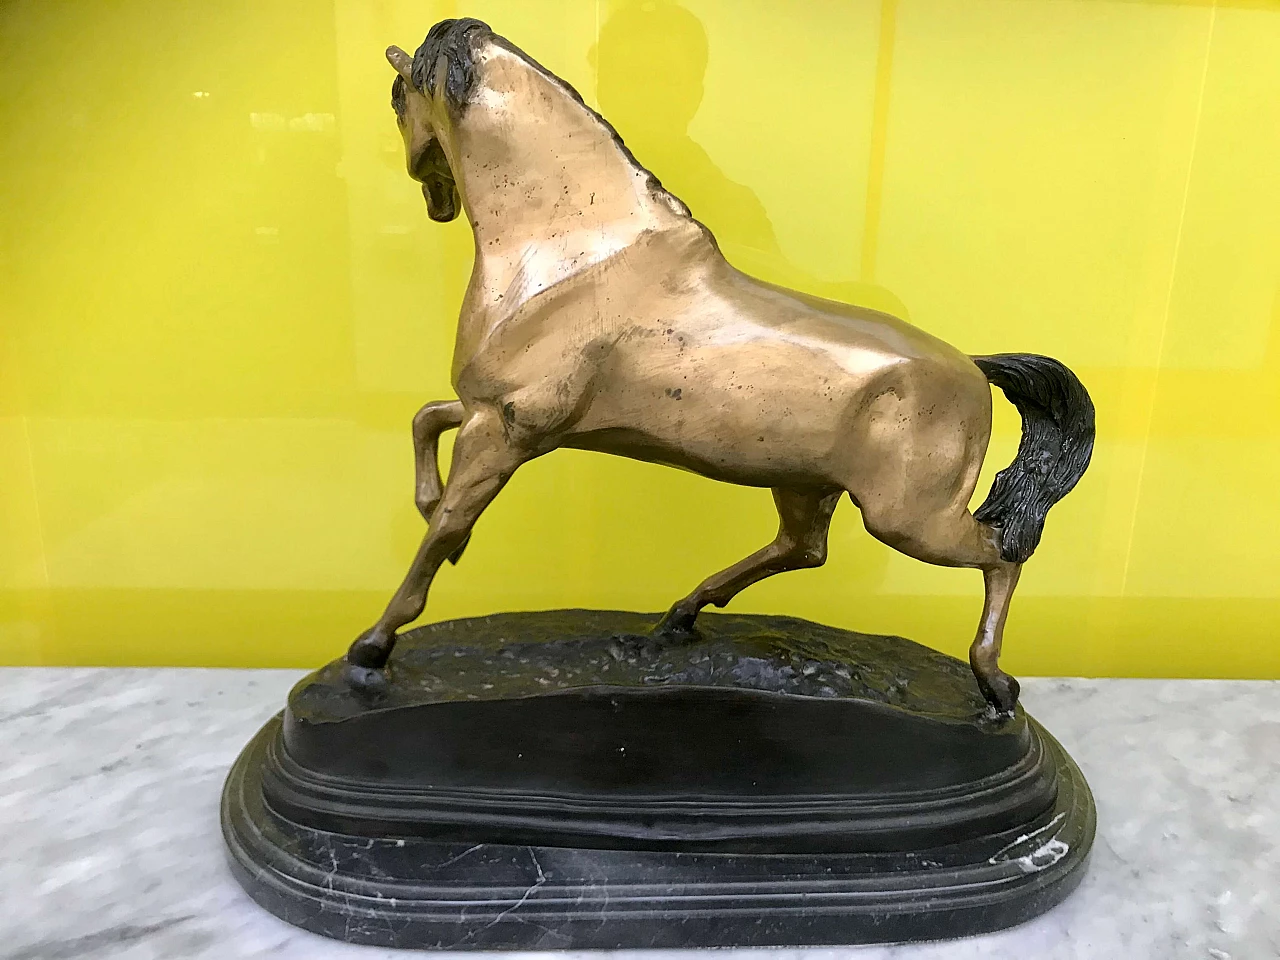 P.J.Mêne, gilded and burnished bronze sculpture of a "Horse" with black marble base, original 19th century 1177730